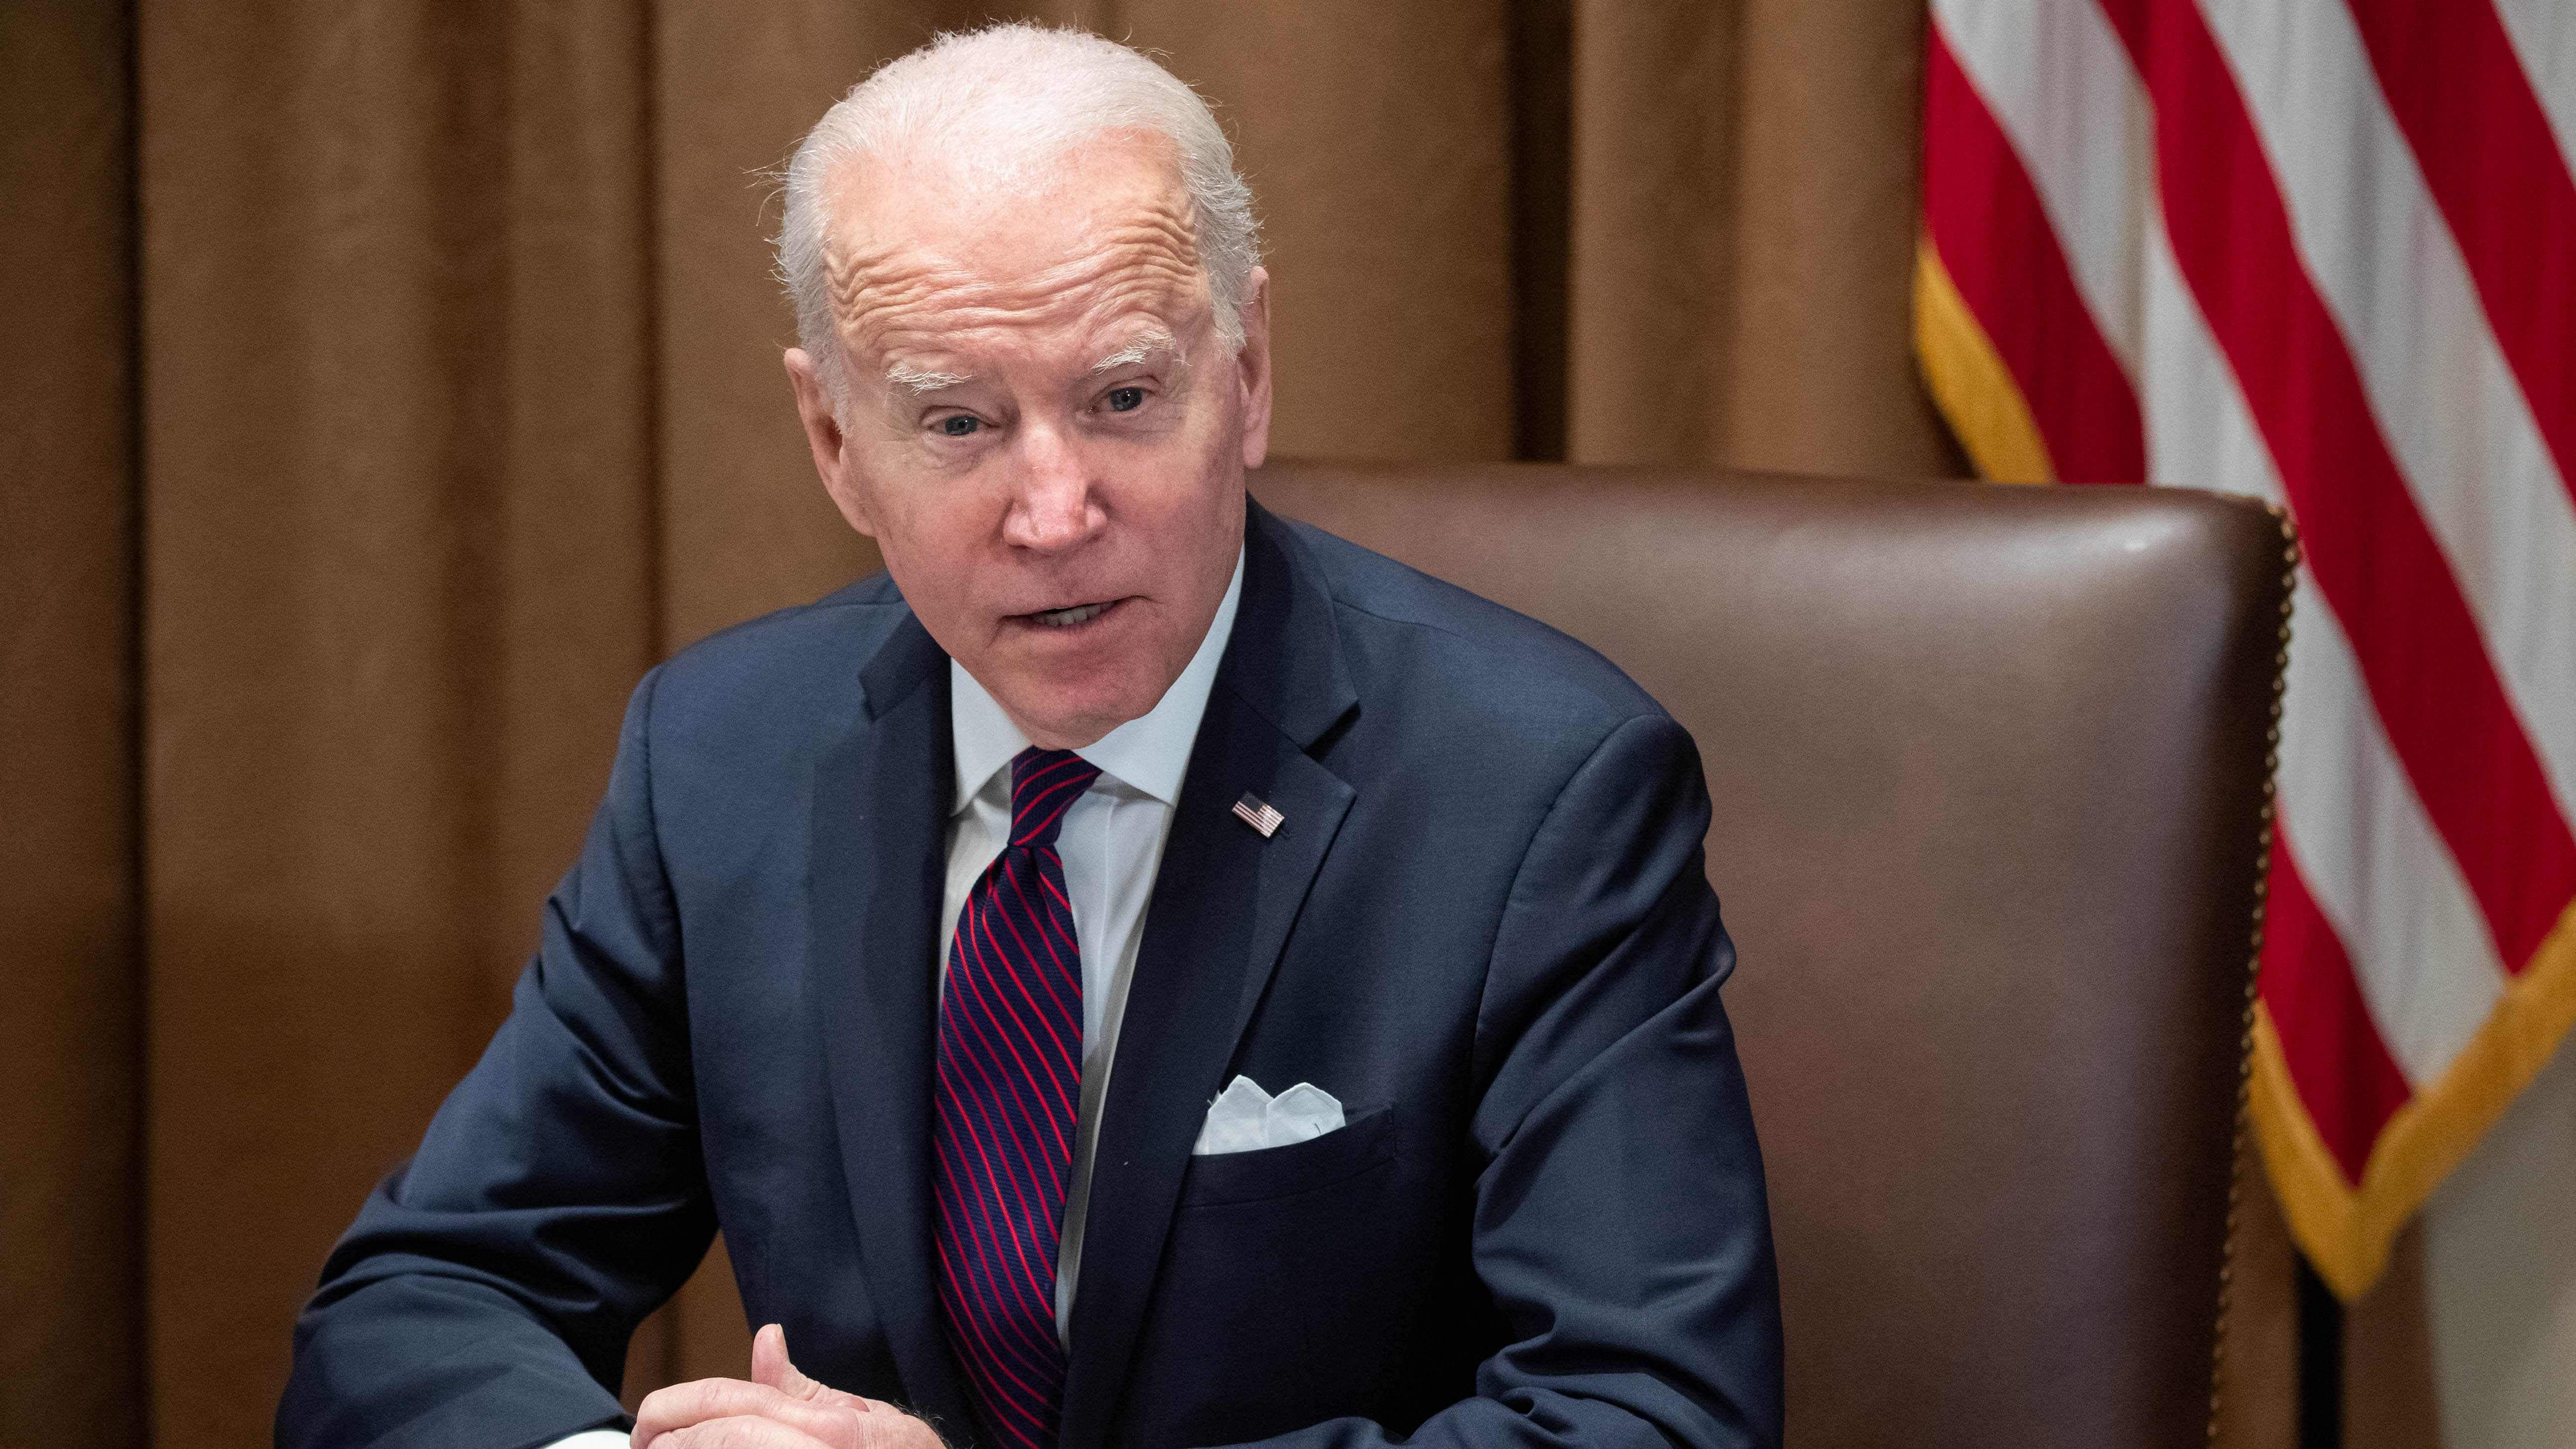 During a search Friday of Biden's home in Wilmington, Delaware, the FBI found additional documents with classified markings and took possession of some of his handwritten notes, the president's lawyer said Saturday. Credit: AFP Photo